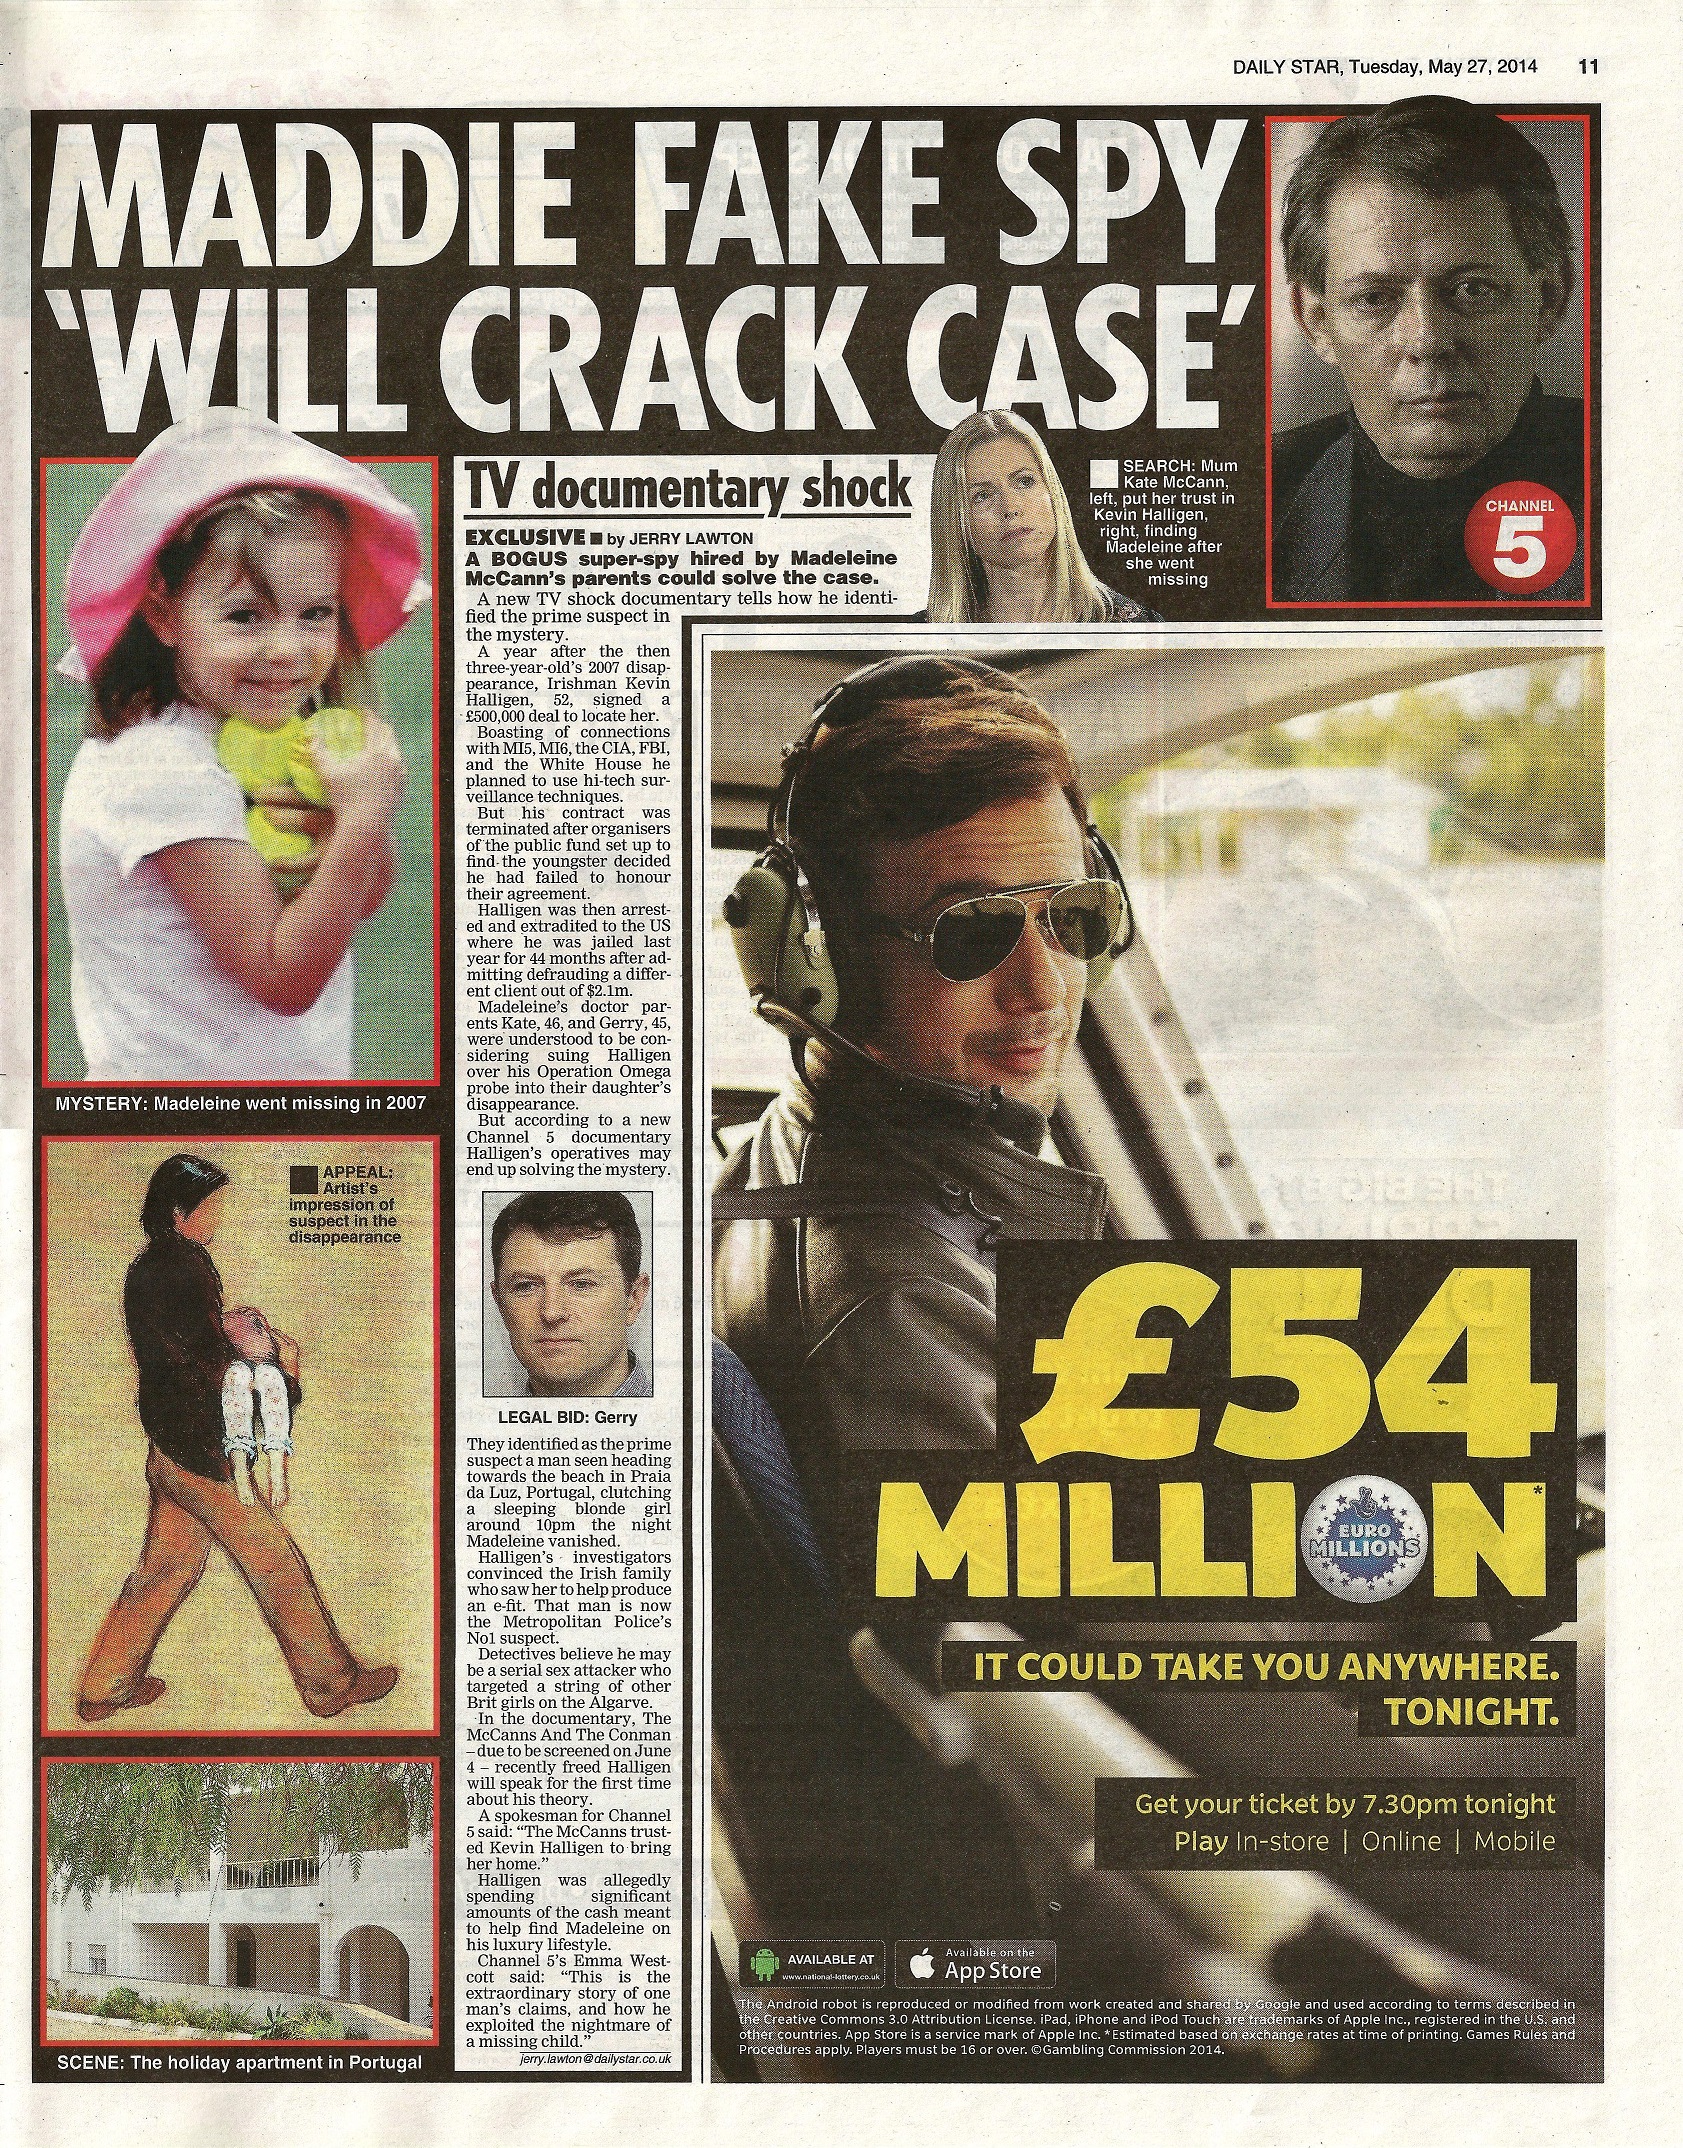 Maddie fake spy 'will crack case' - Daily Star, 27 May 2014 (paper edition, page 11)